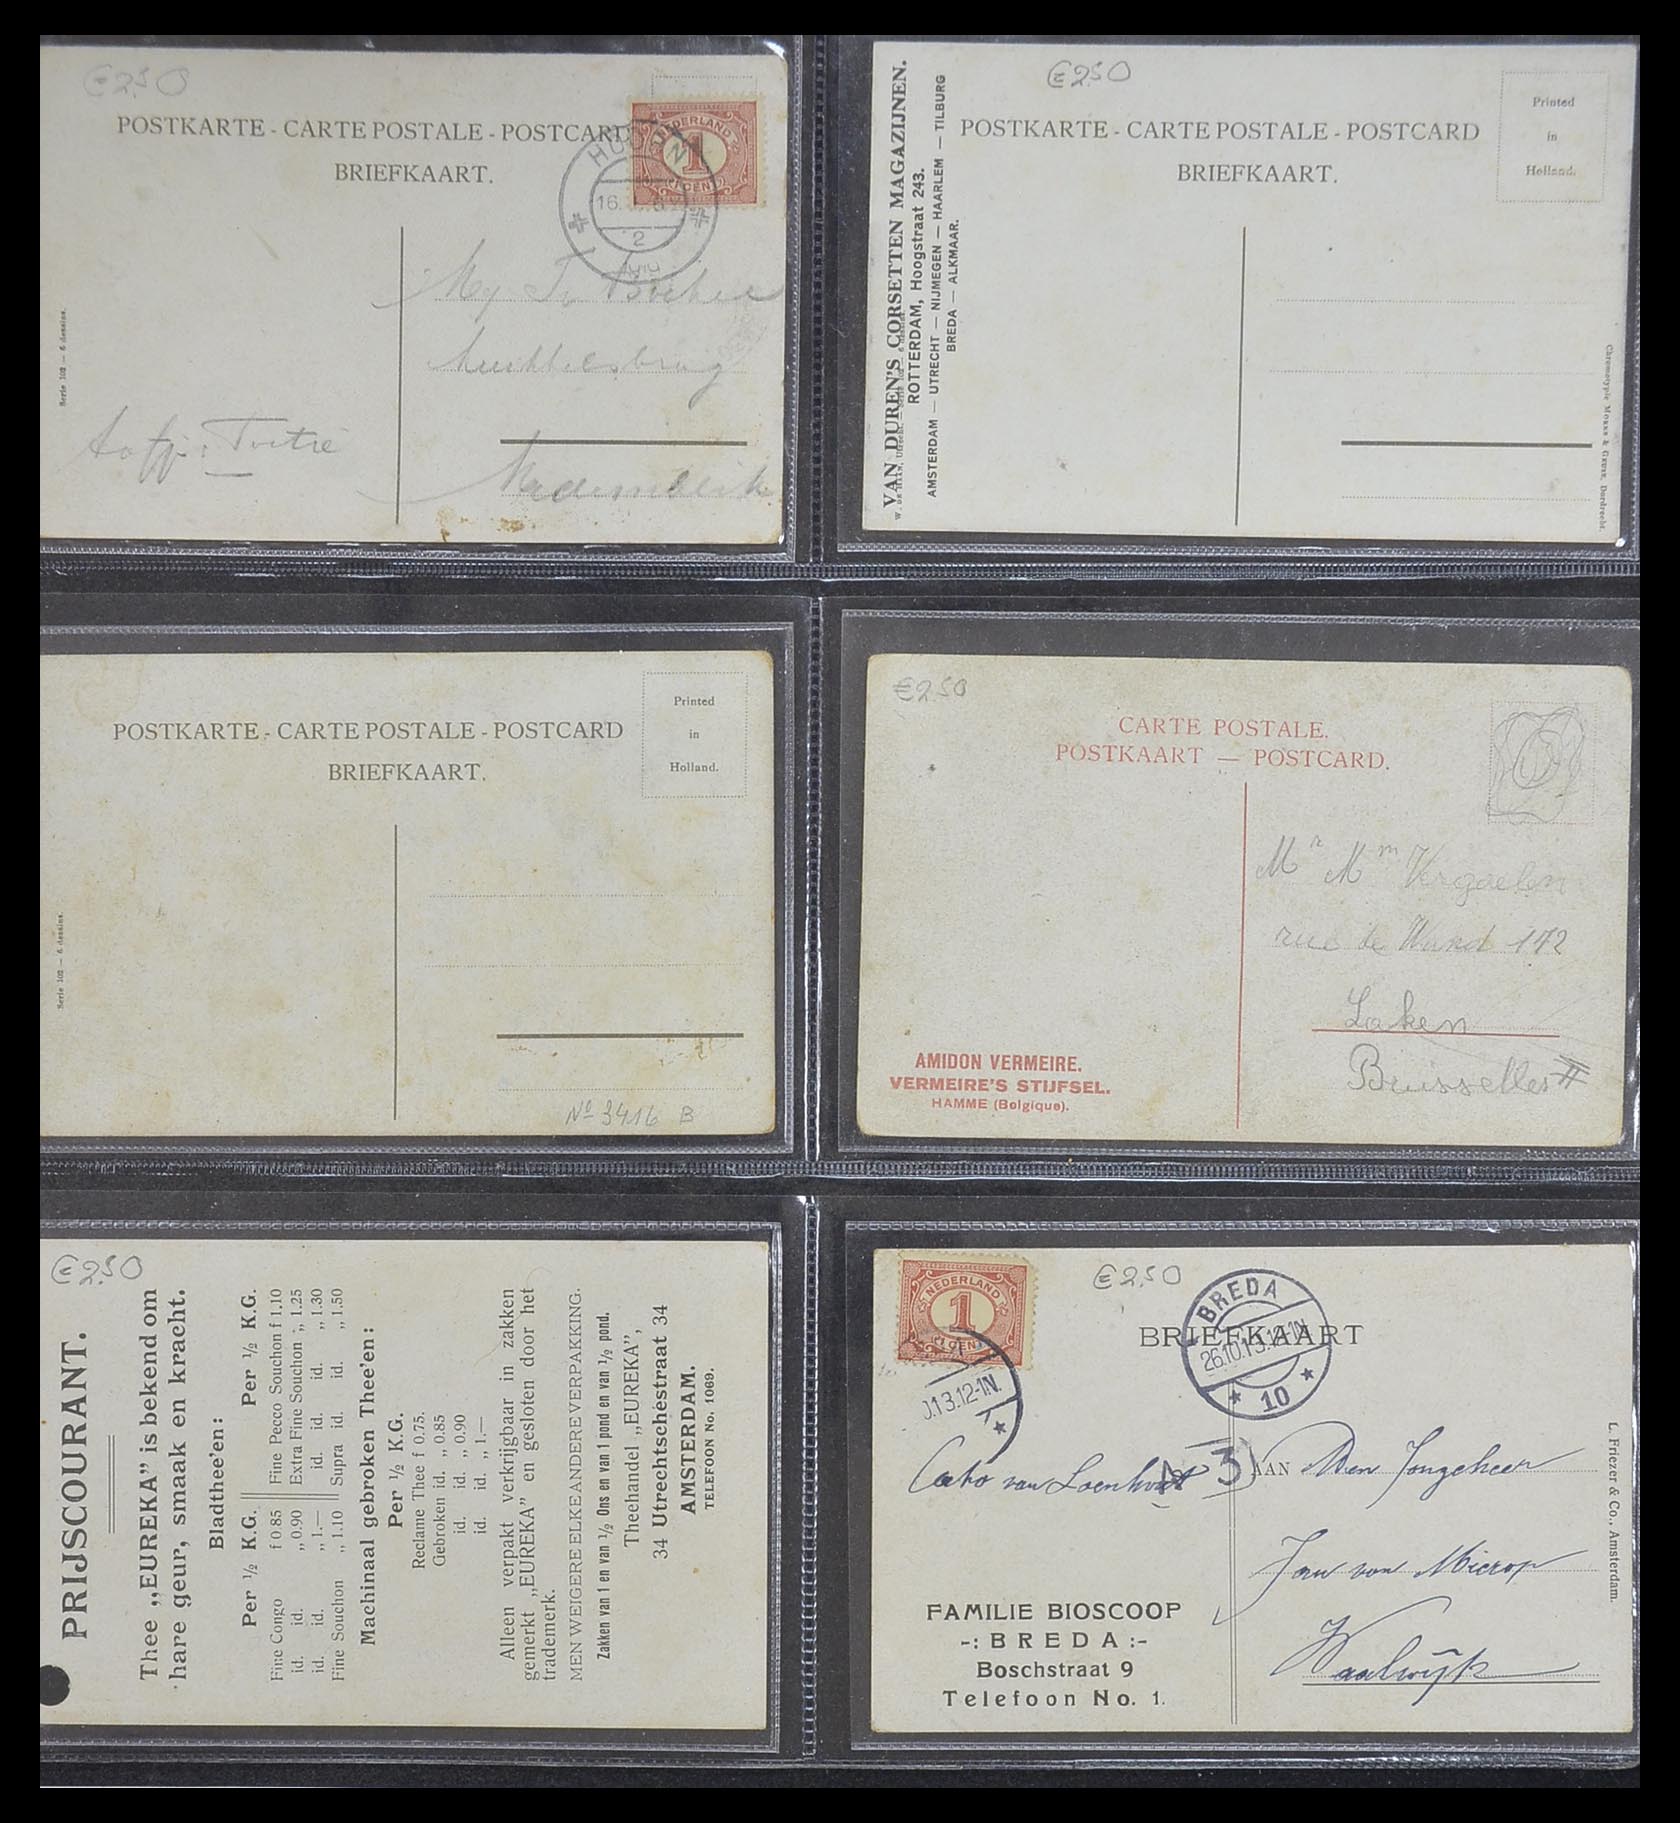 33928 059 - Stamp collection 33928 Netherlands picture postcards 1910-1930.